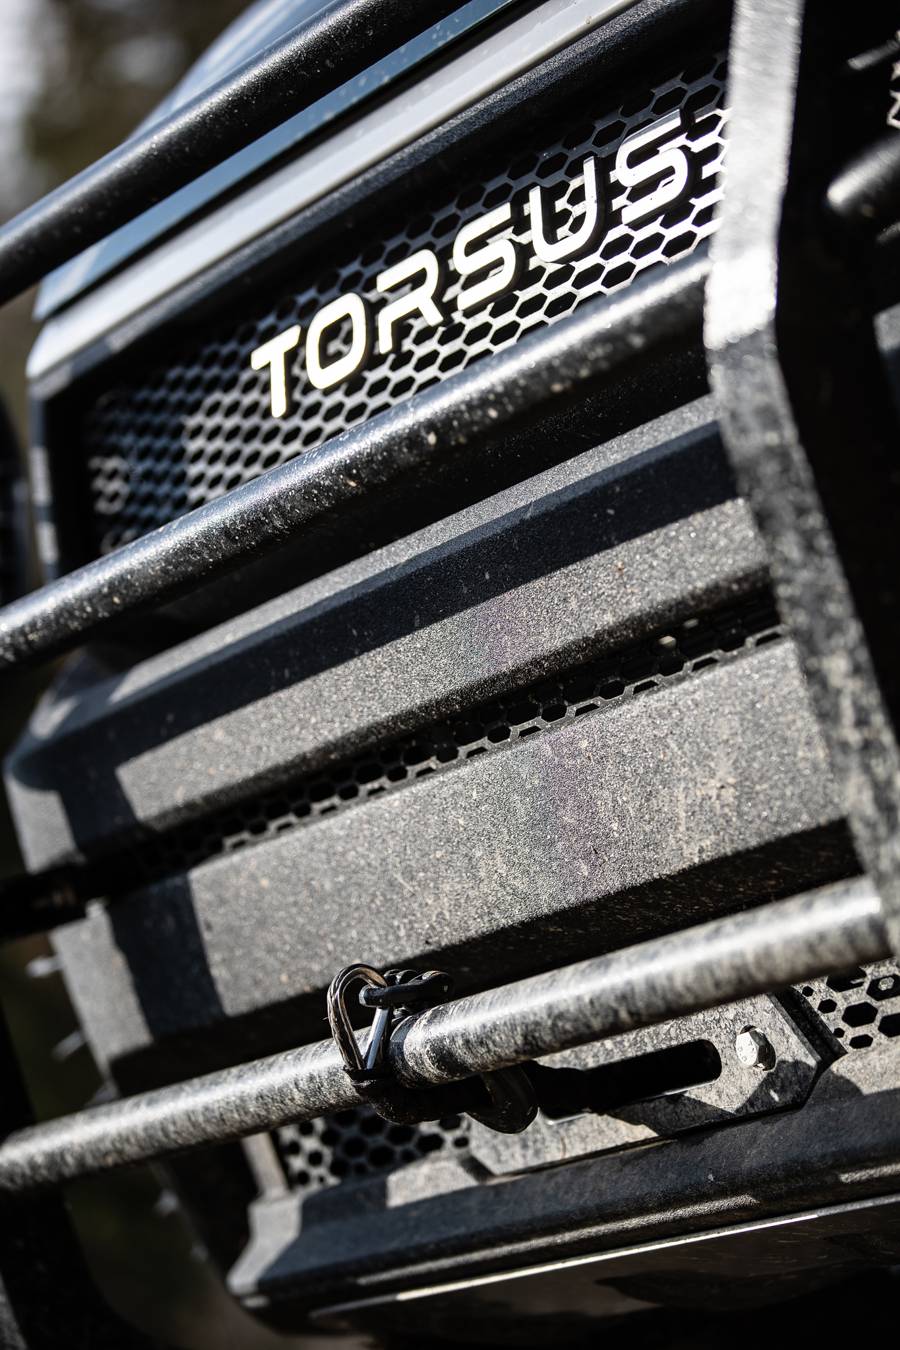 TORSUS TERRASTORM promises to take off-road minibuses to new heights